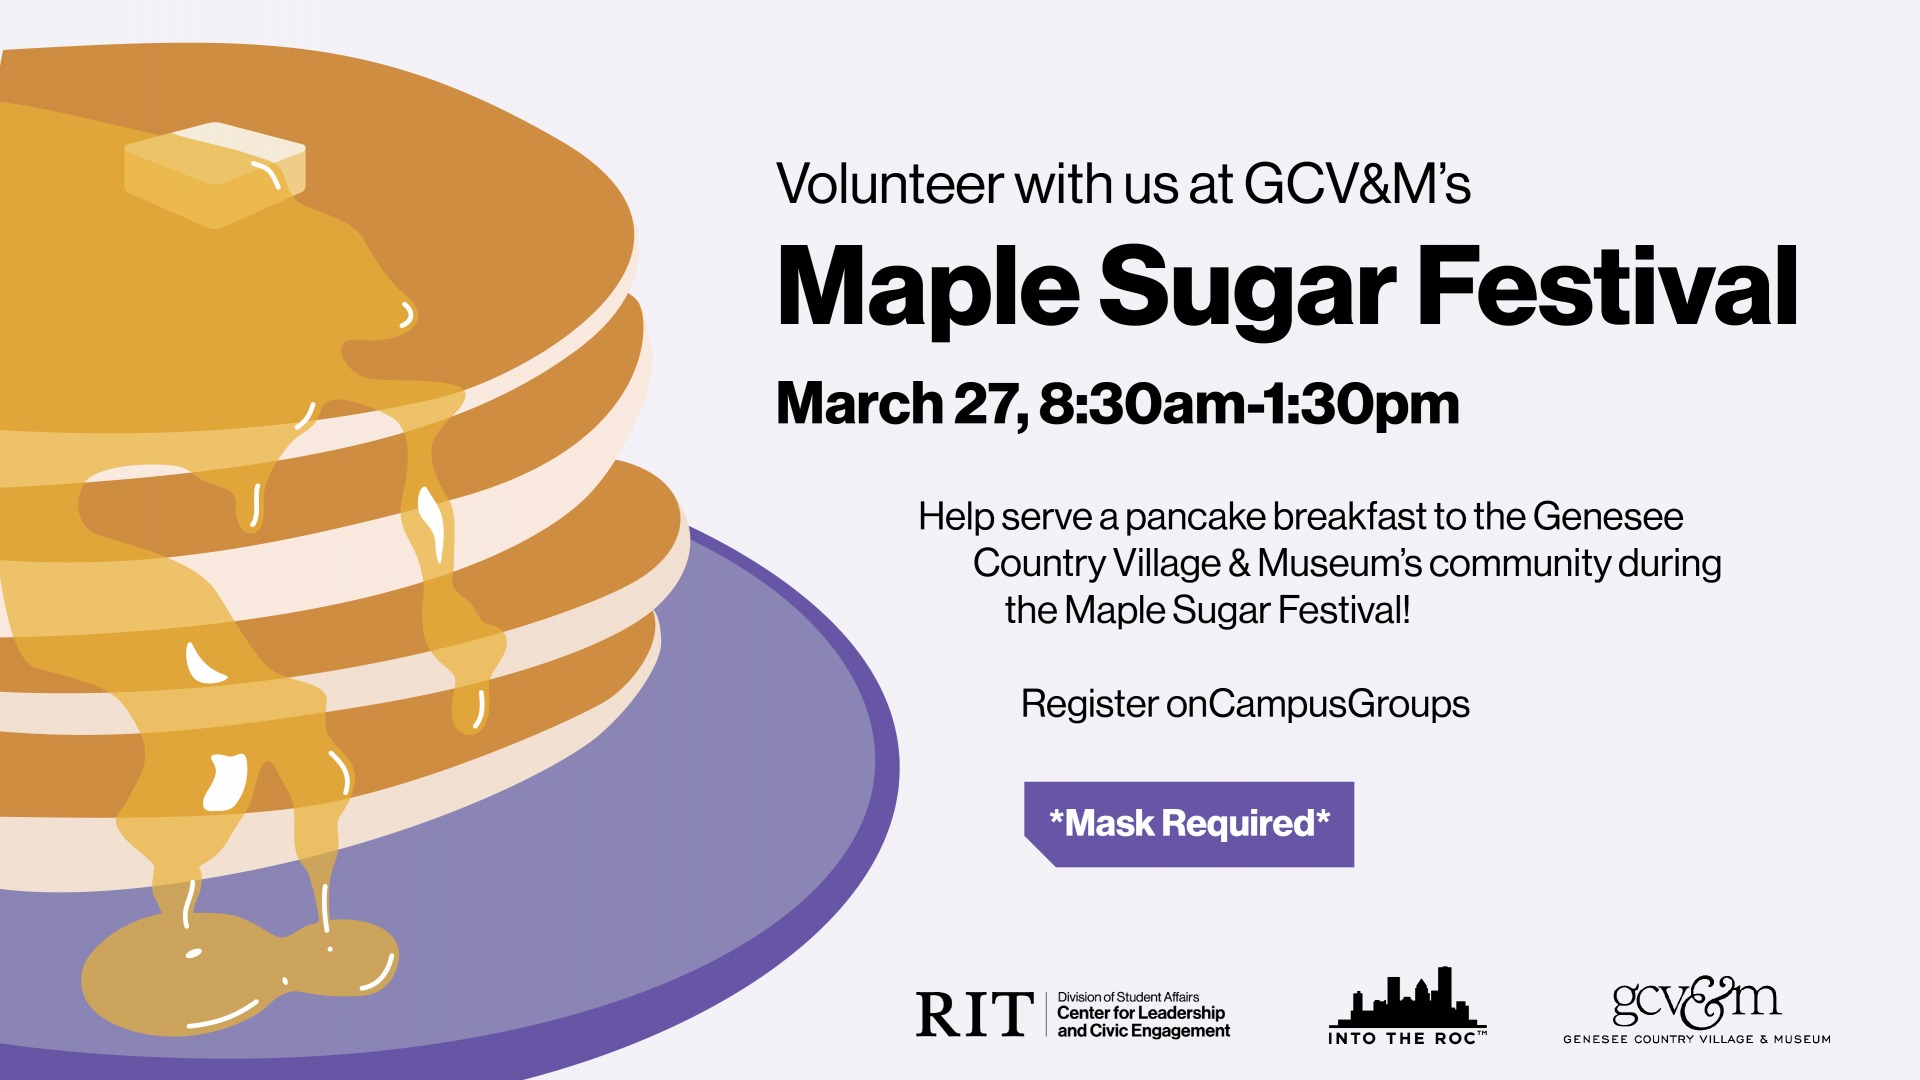 A stack of pancakes covered in maple syrup is on the left of the image. Next to it, text describing the details of the event.